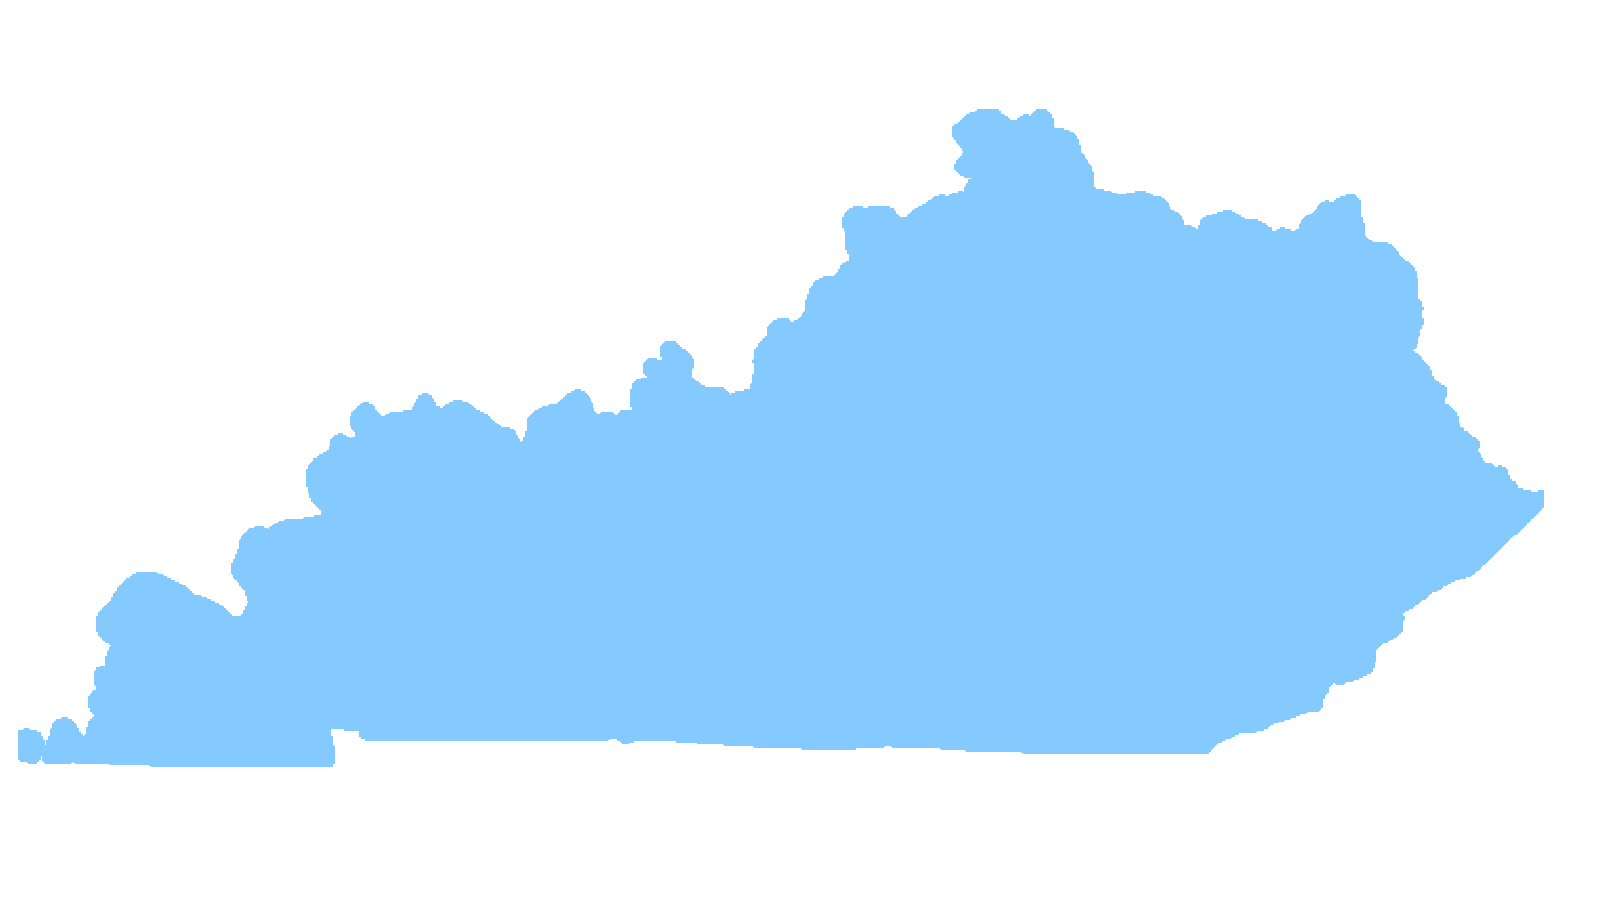 Kentucky Implements New Restrictions to Save Lives - Following a record 33 deaths announced Tuesday, Gov. Andy Beshear is issuing new restrictions that will help stop the rampant spread of COVID-19 and save Kentuckians’ lives while keeping the economy open.